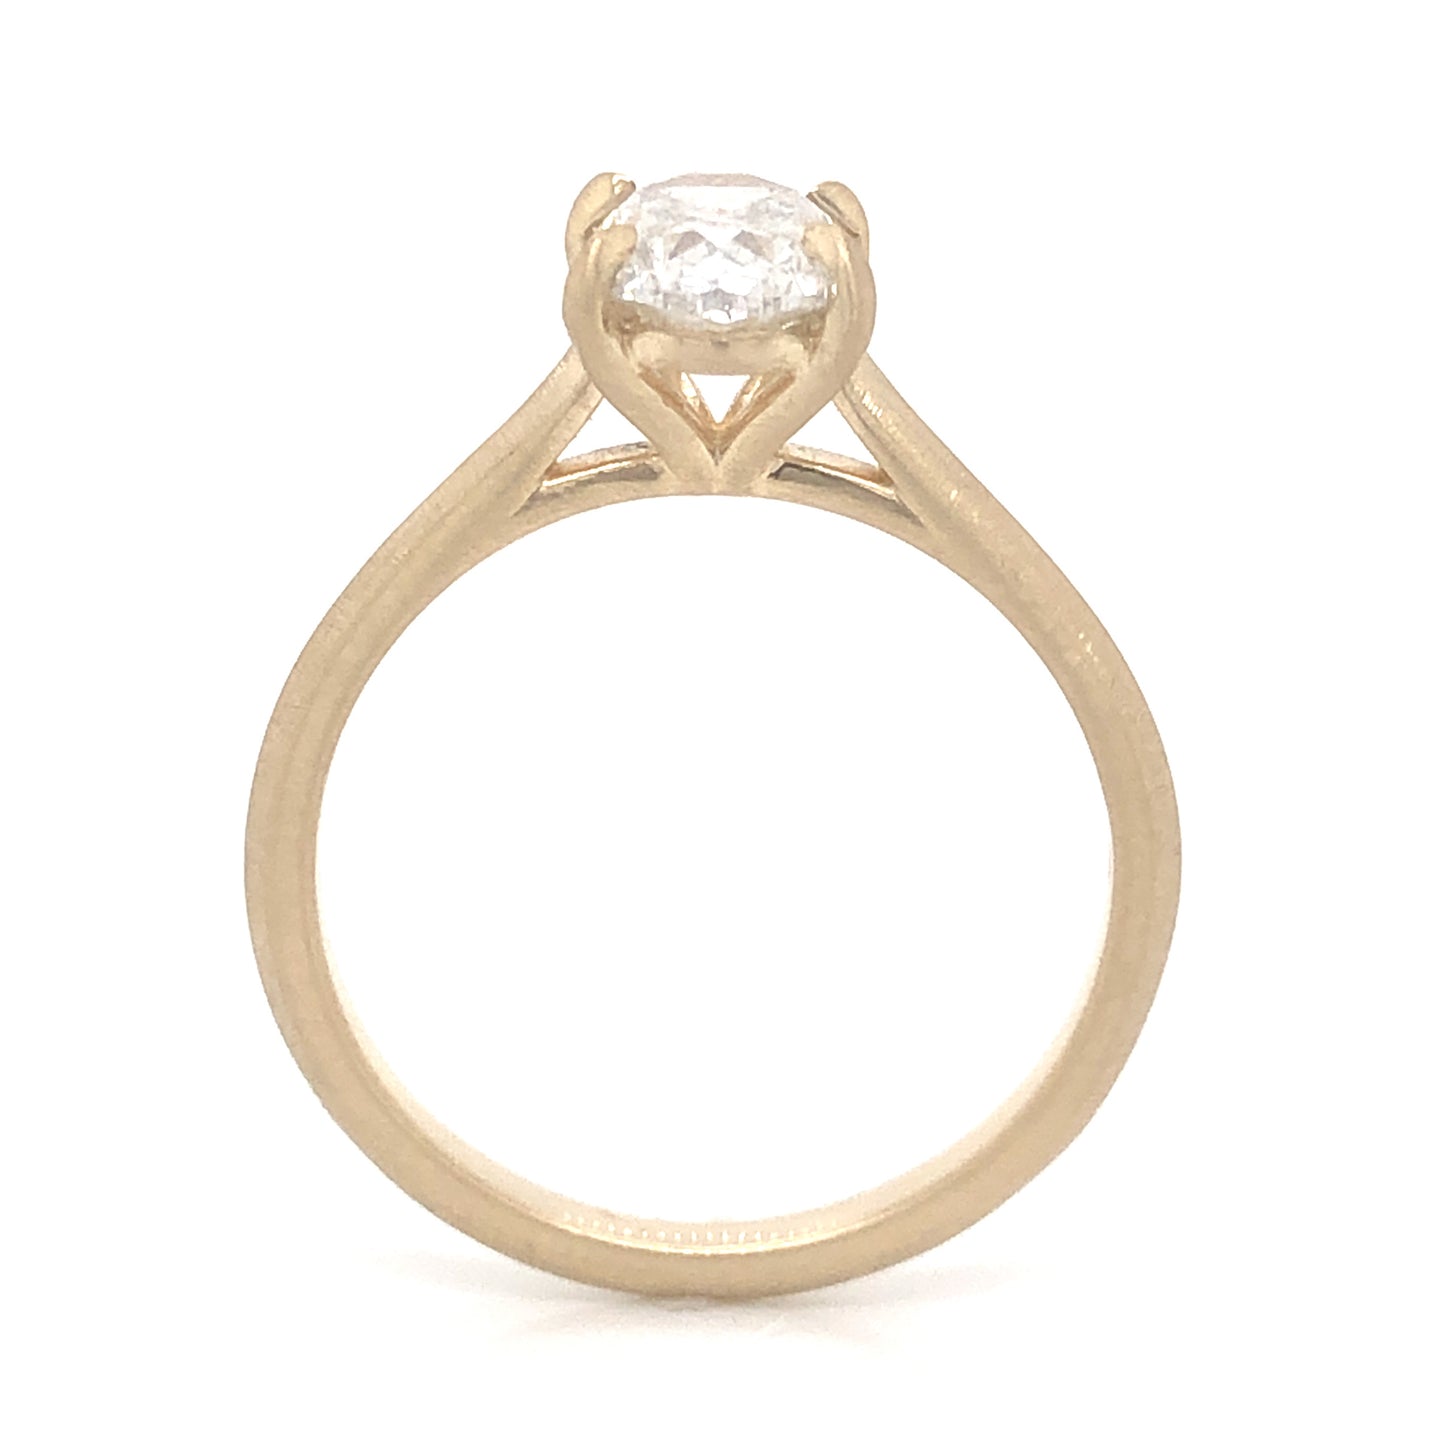 1.41 Rustic Oval Diamond Engagement Ring in 14k Yellow Gold